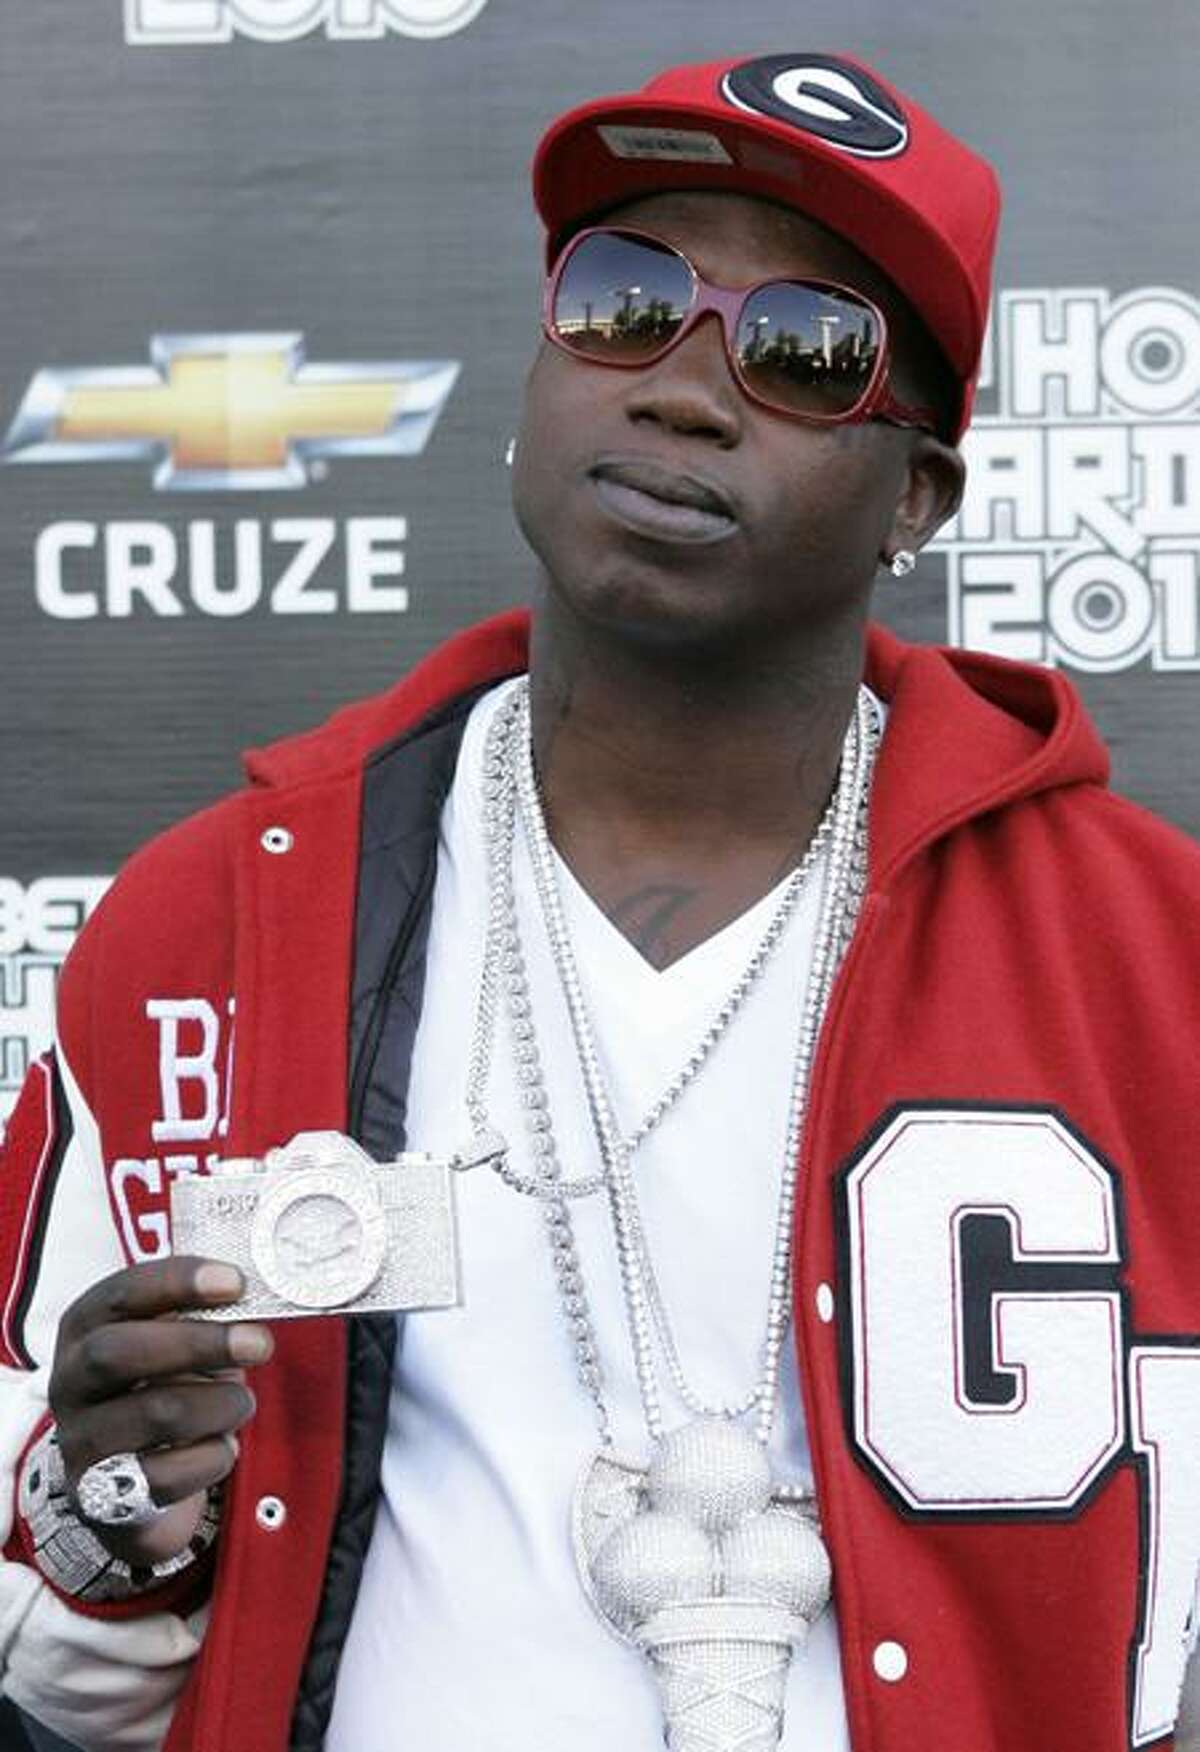 Rapper Gucci Mane charged with battery